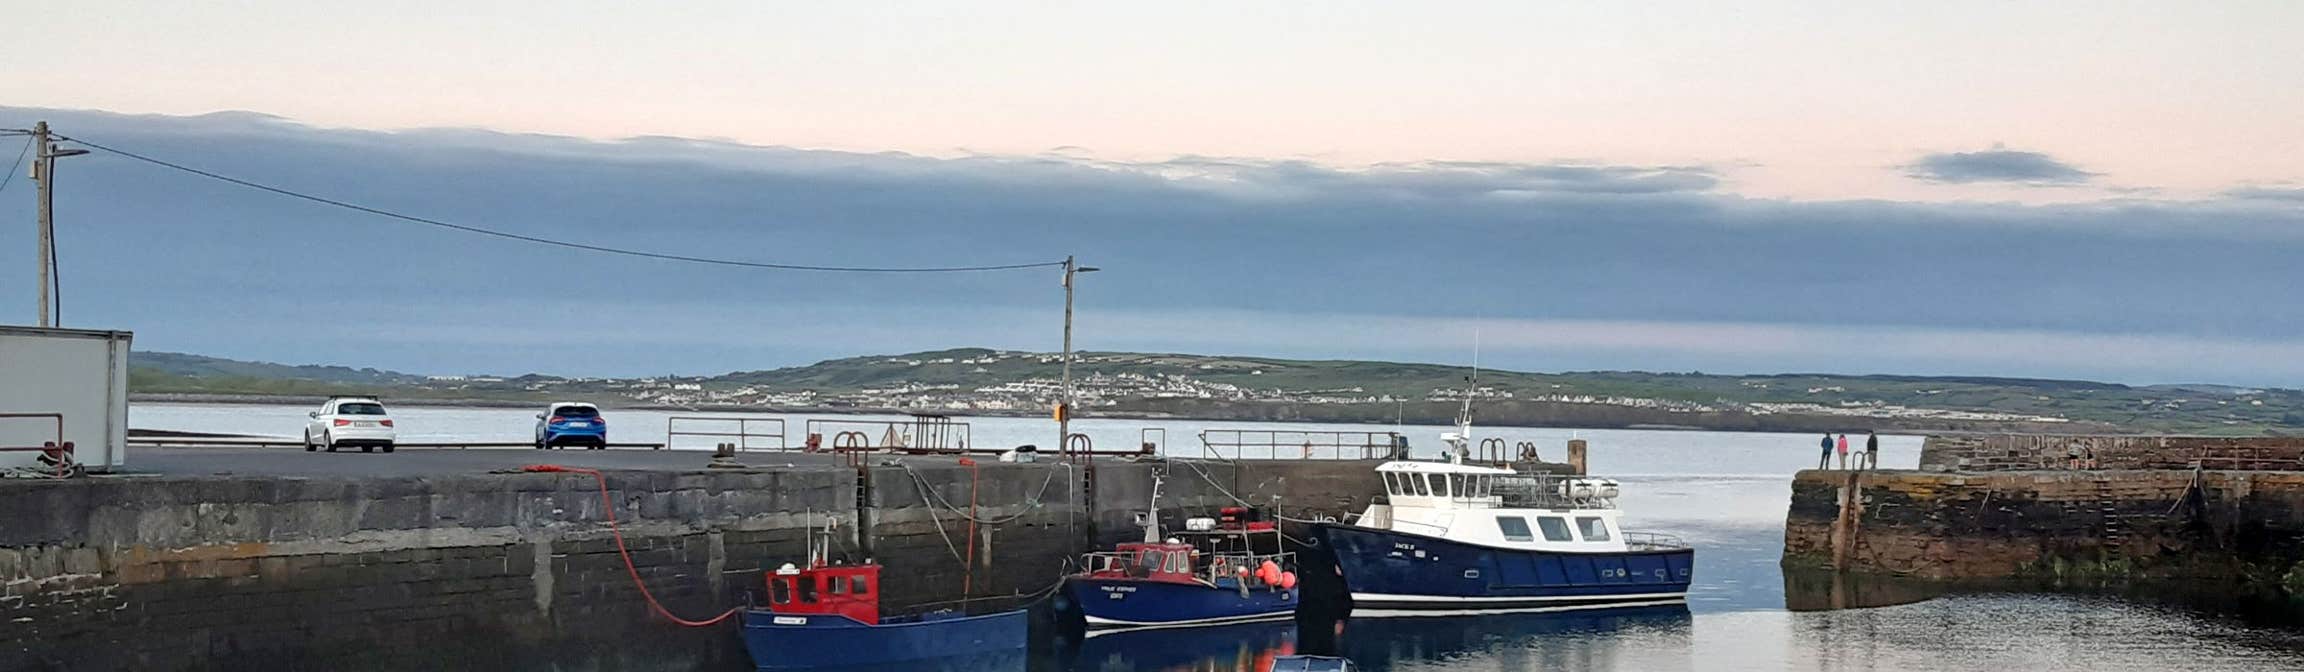 Image of the harbour in Liscannor in County Clare